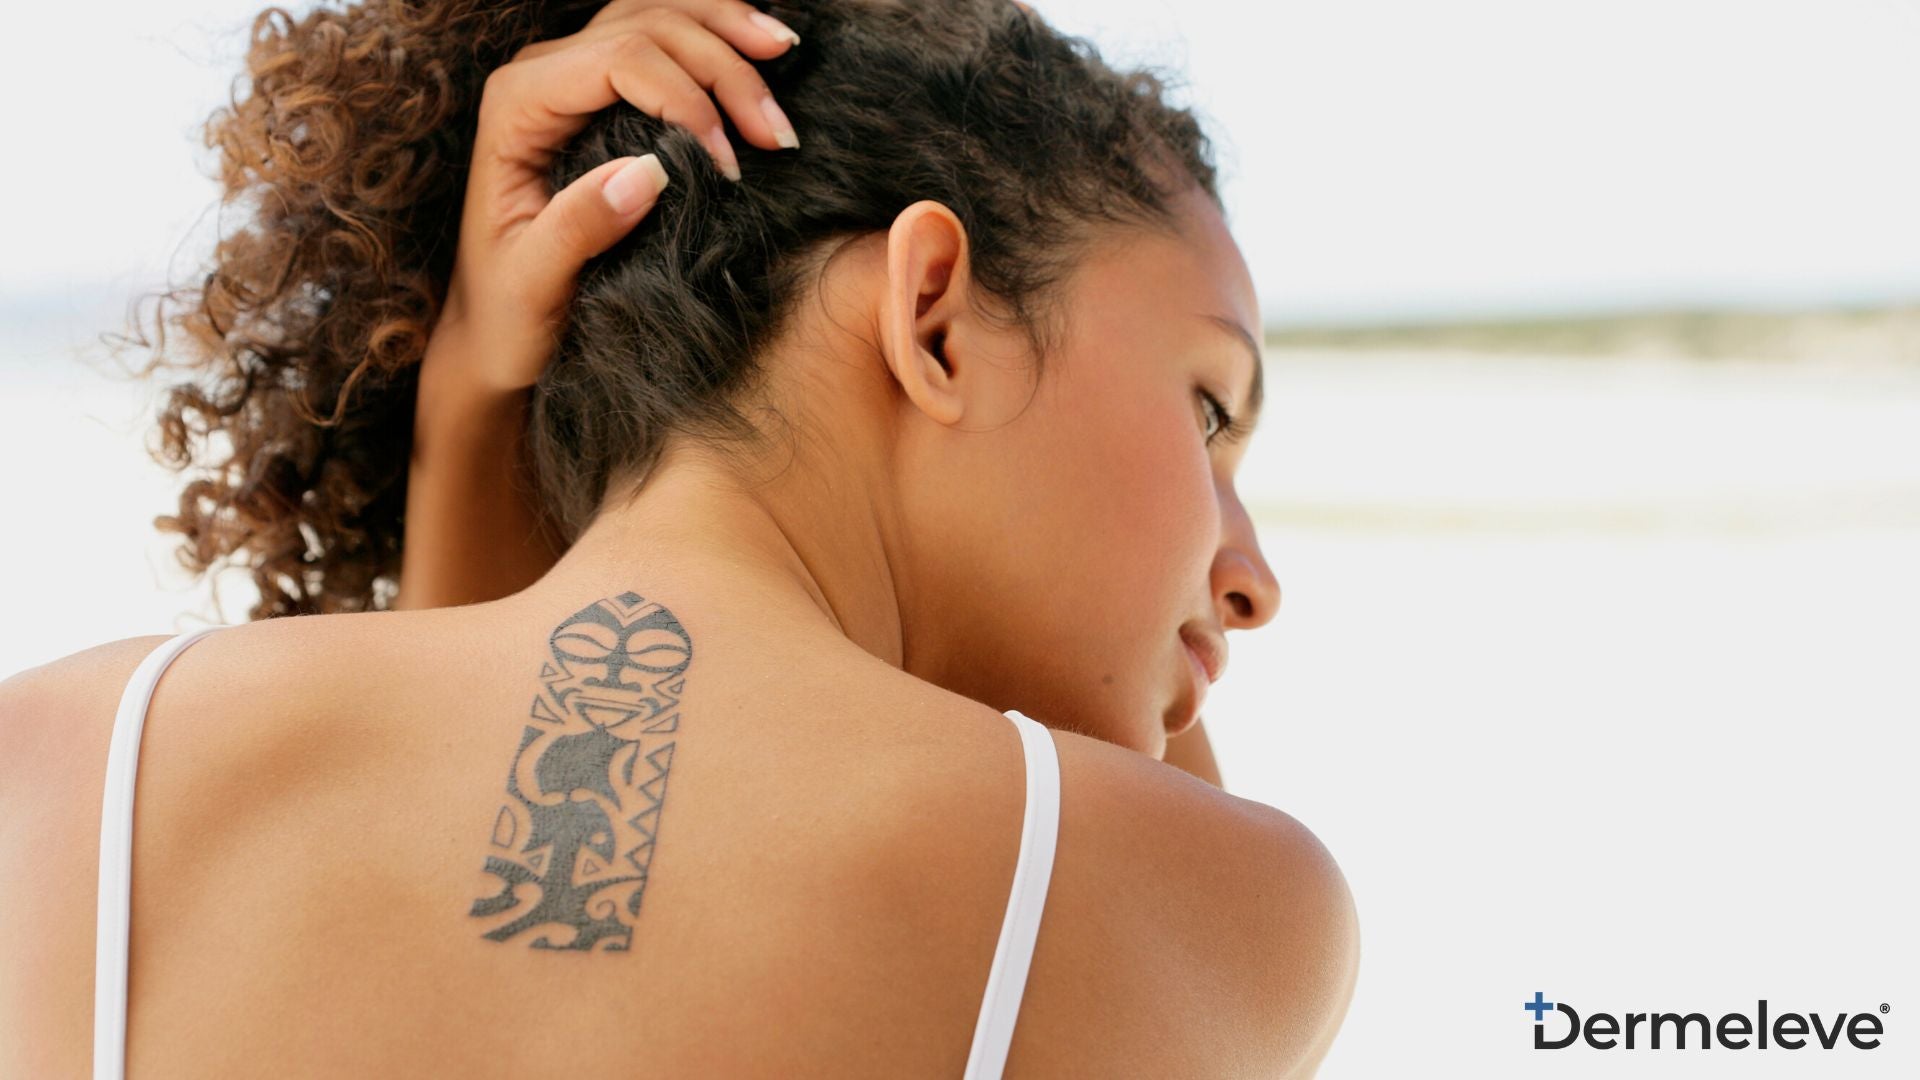 How to Erase the Past: A Guide to Cover Up Tattoos • Tattoodo